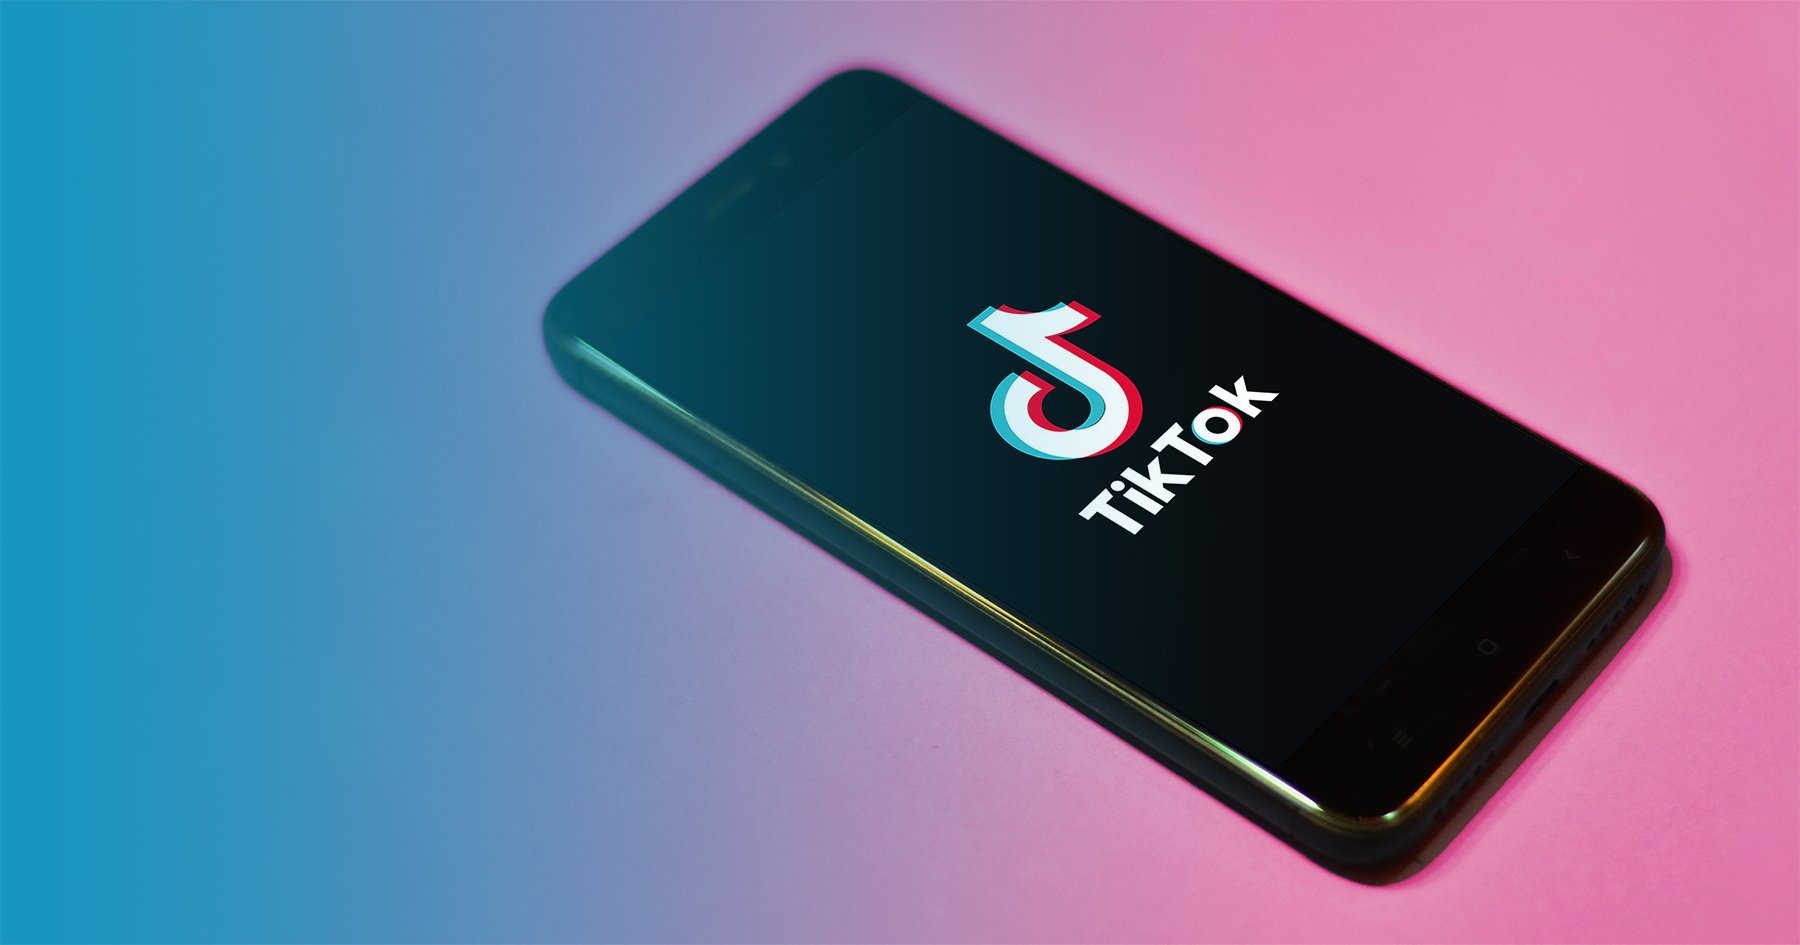 Phone with TikTok app open on a pink background